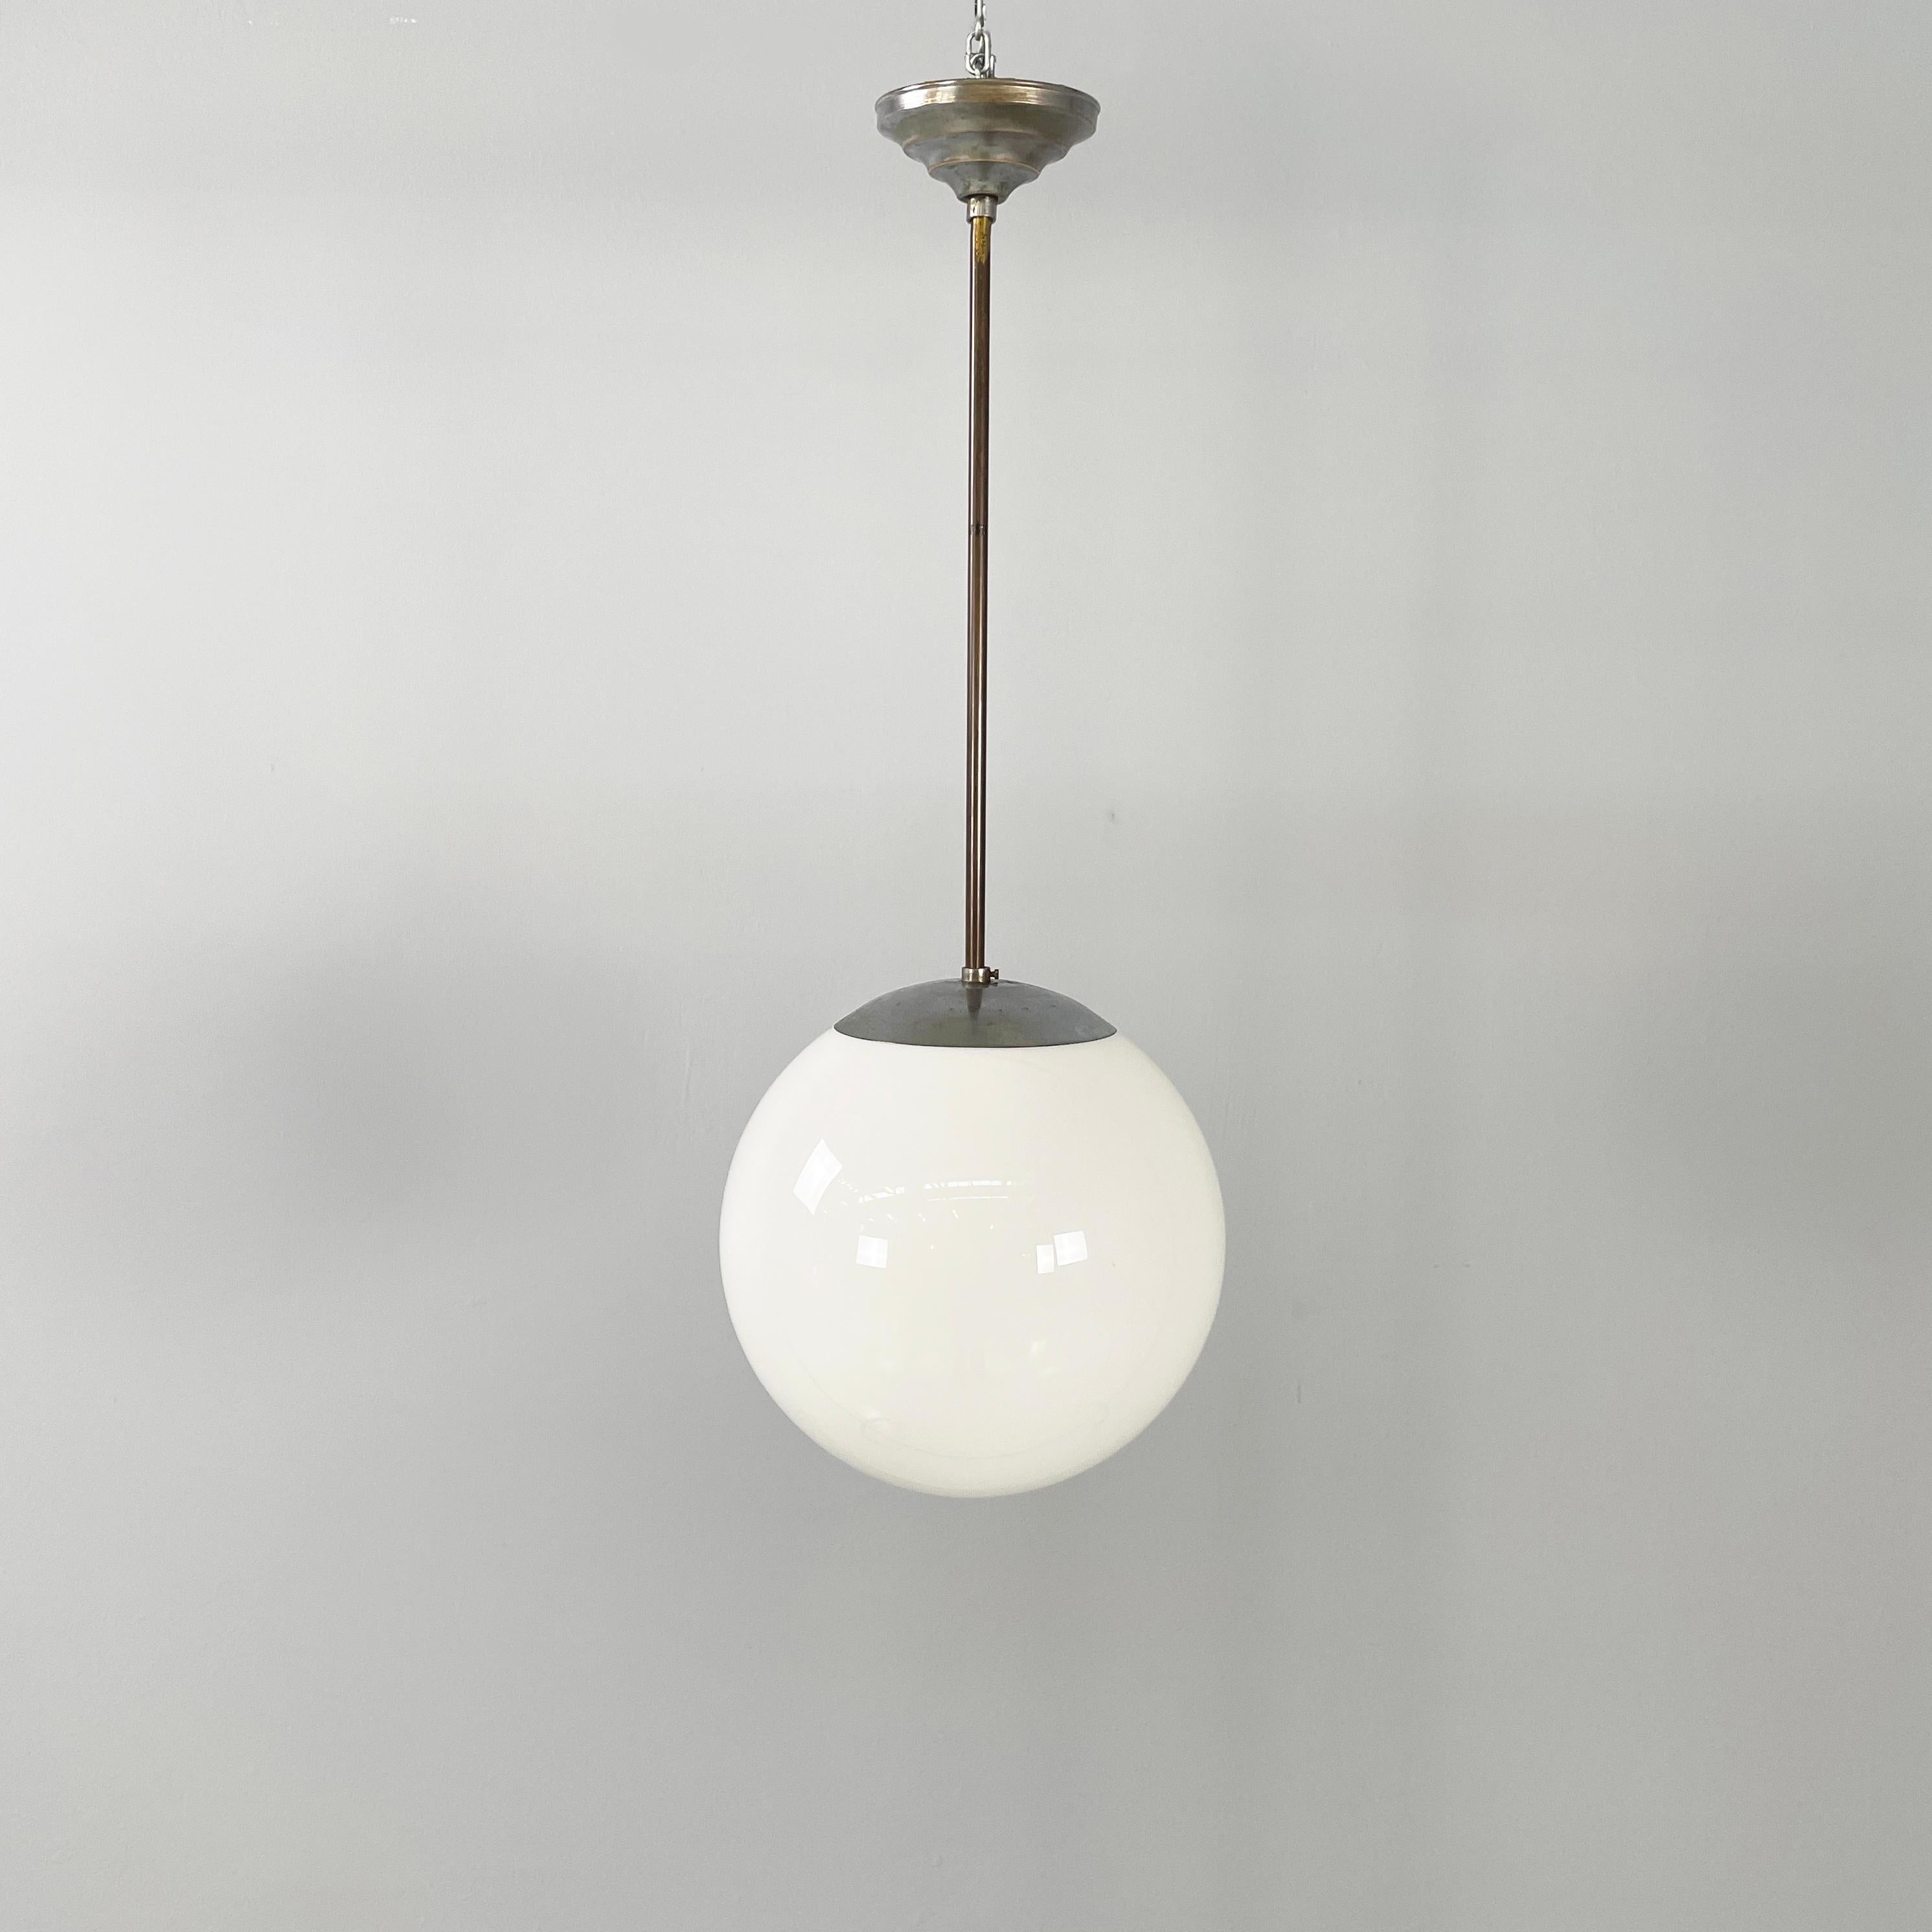 Italian mid-century modern/art deco Chandelier in opaline glass and metal, 1940s
Chandelier with spherical opaline glass diffuser. The structure is made up of a curved and round part, that is the connection to the diffuser, and a metal rod. The